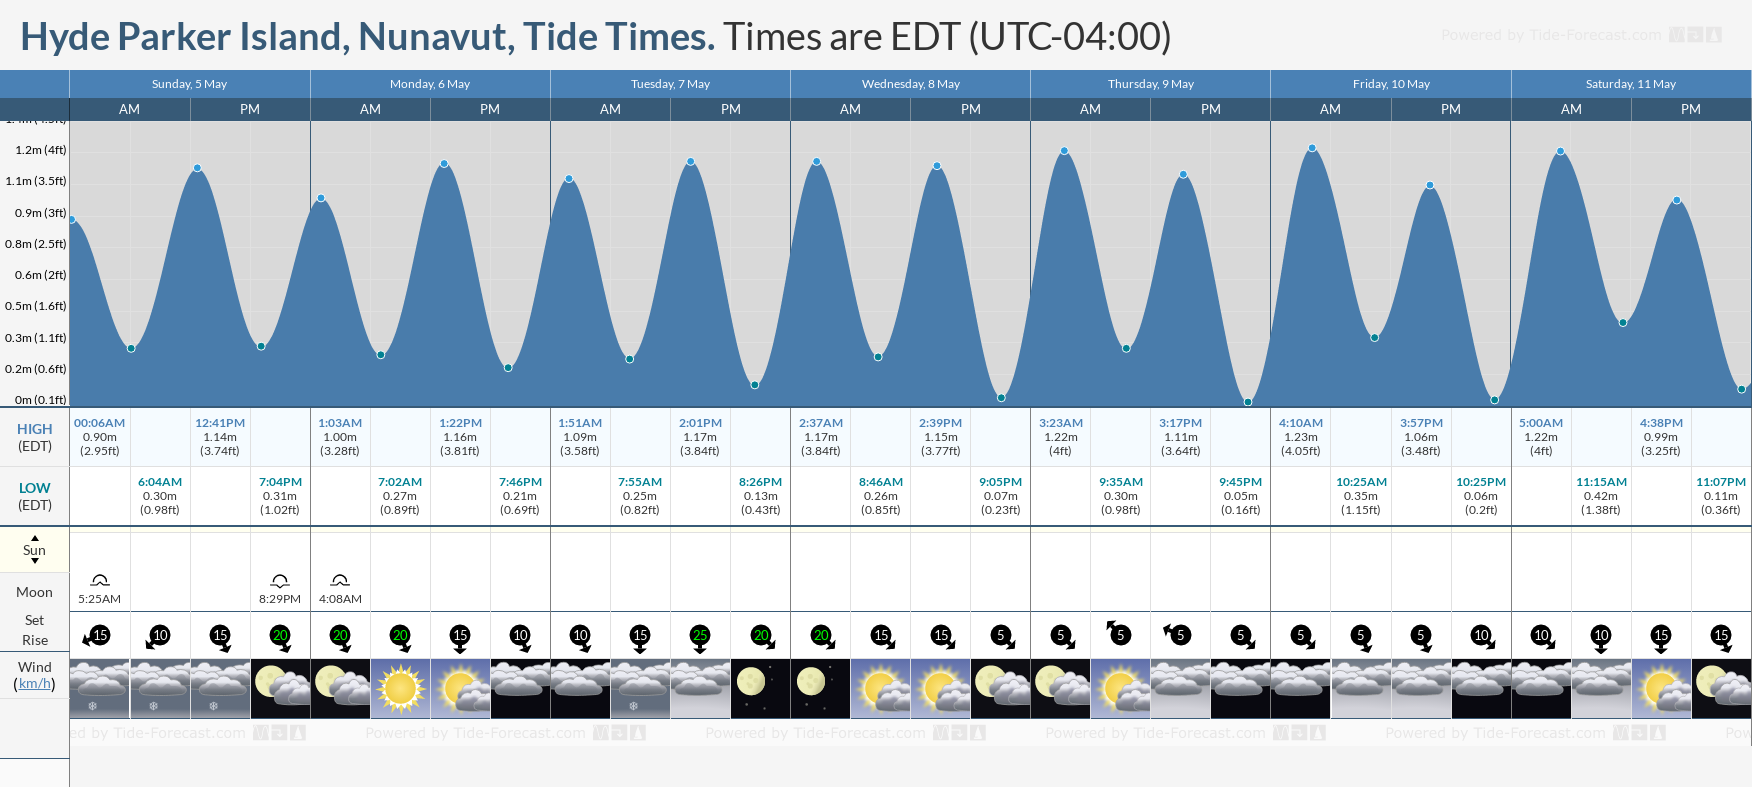 Hyde Parker Island, Nunavut Tide Chart including high and low tide tide times for the next 7 days